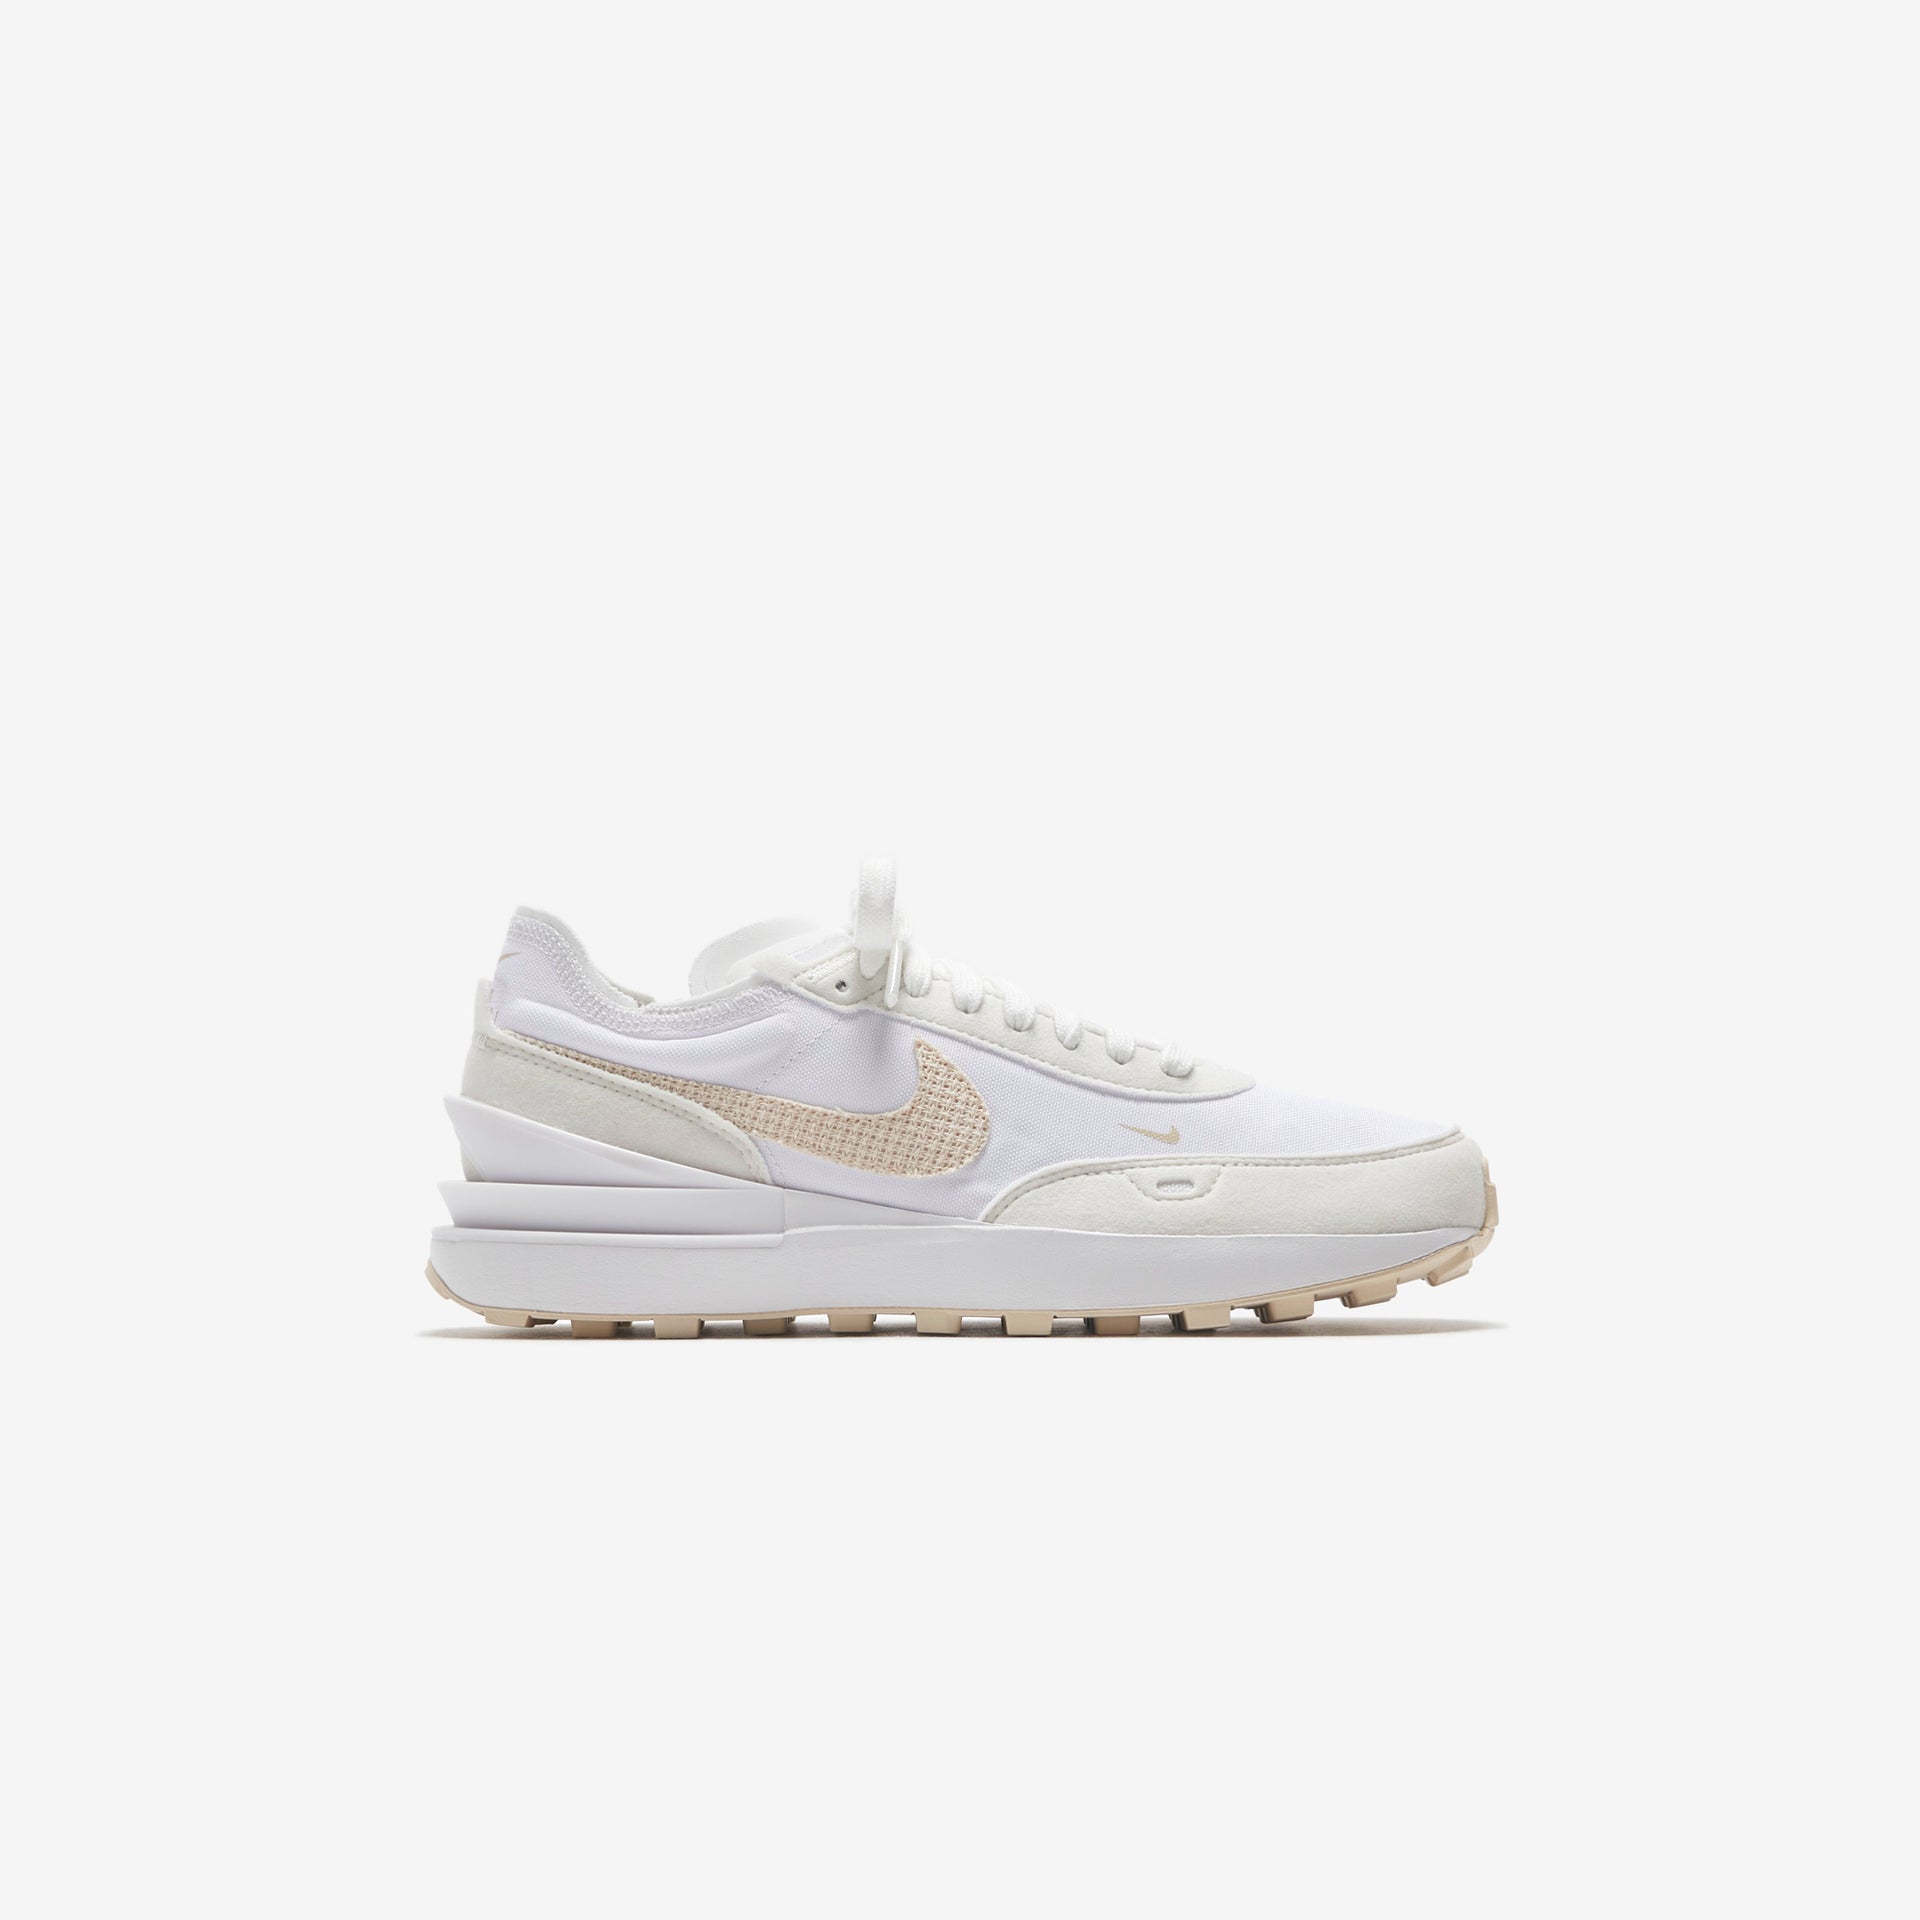 Nike Wmns Waffle One - Summit White / Fossil